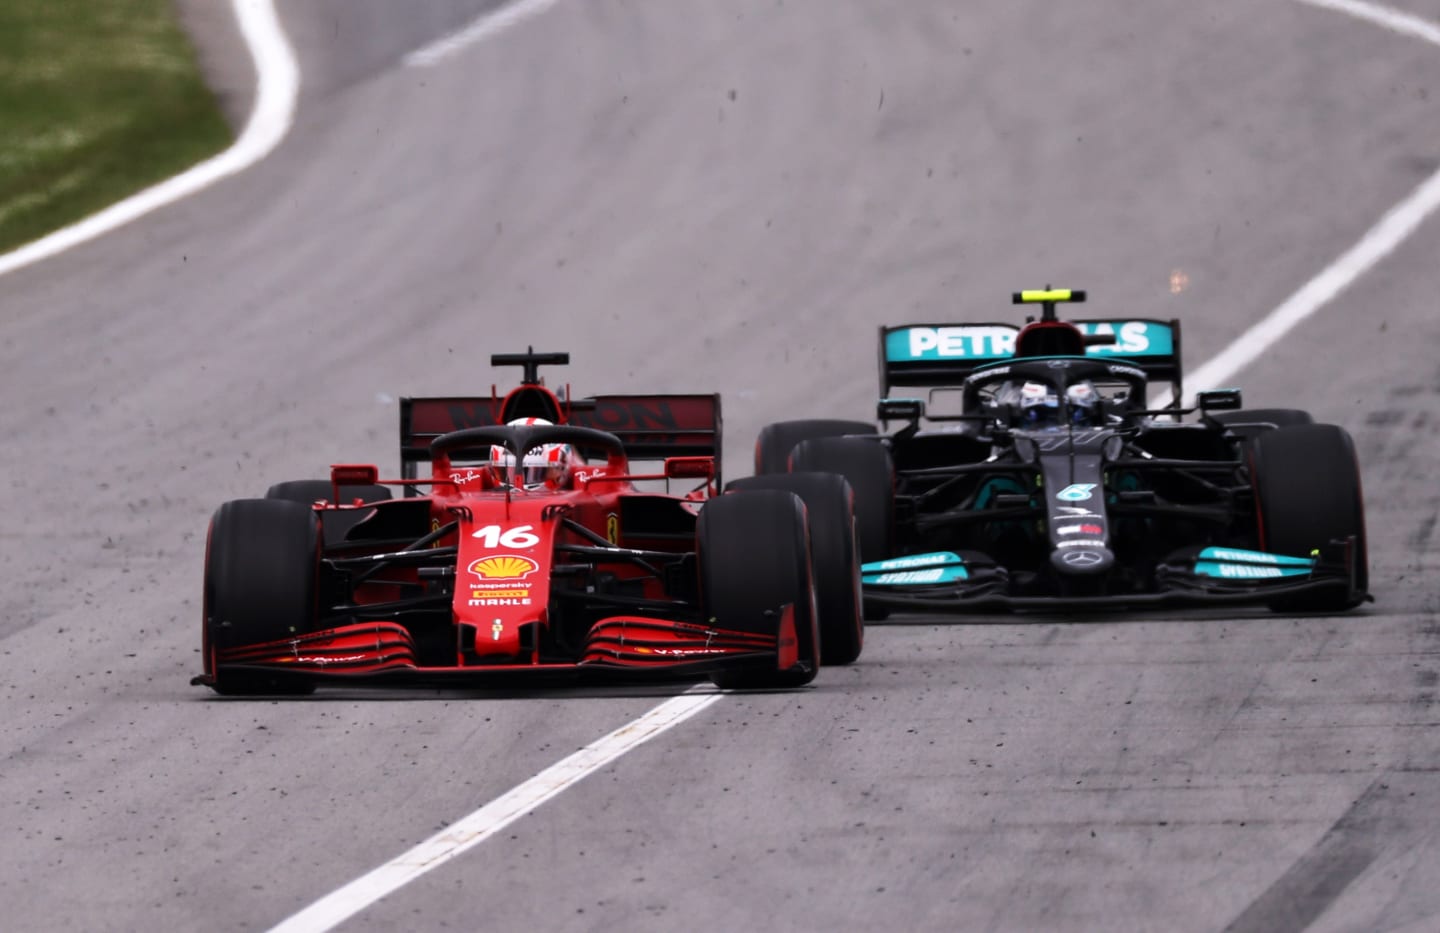 BARCELONA, SPAIN - MAY 09: Charles Leclerc of Monaco driving the (16) Scuderia Ferrari SF21 leads Valtteri Bottas of Finland driving the (77) Mercedes AMG Petronas F1 Team Mercedes W12 on track during the F1 Grand Prix of Spain at Circuit de Barcelona-Catalunya on May 09, 2021 in Barcelona, Spain. (Photo by Lars Baron/Getty Images)